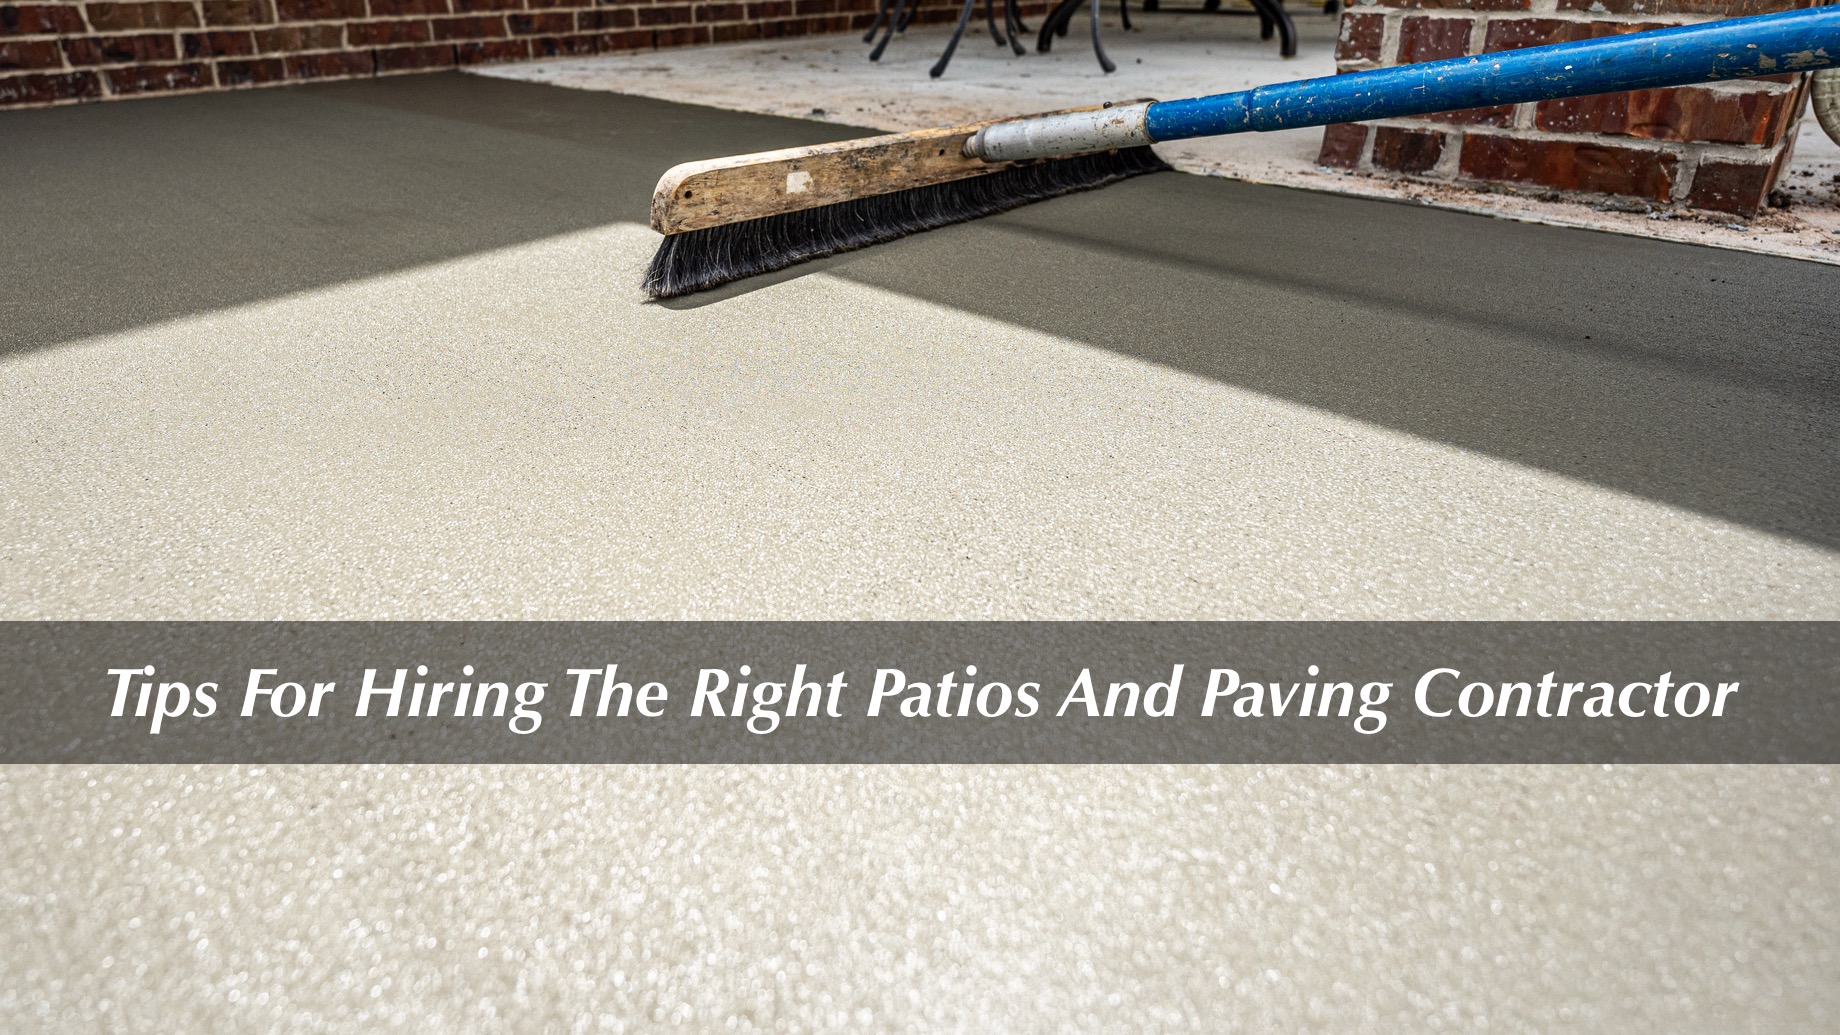 Tips For Hiring The Right Patios And Paving Contractor